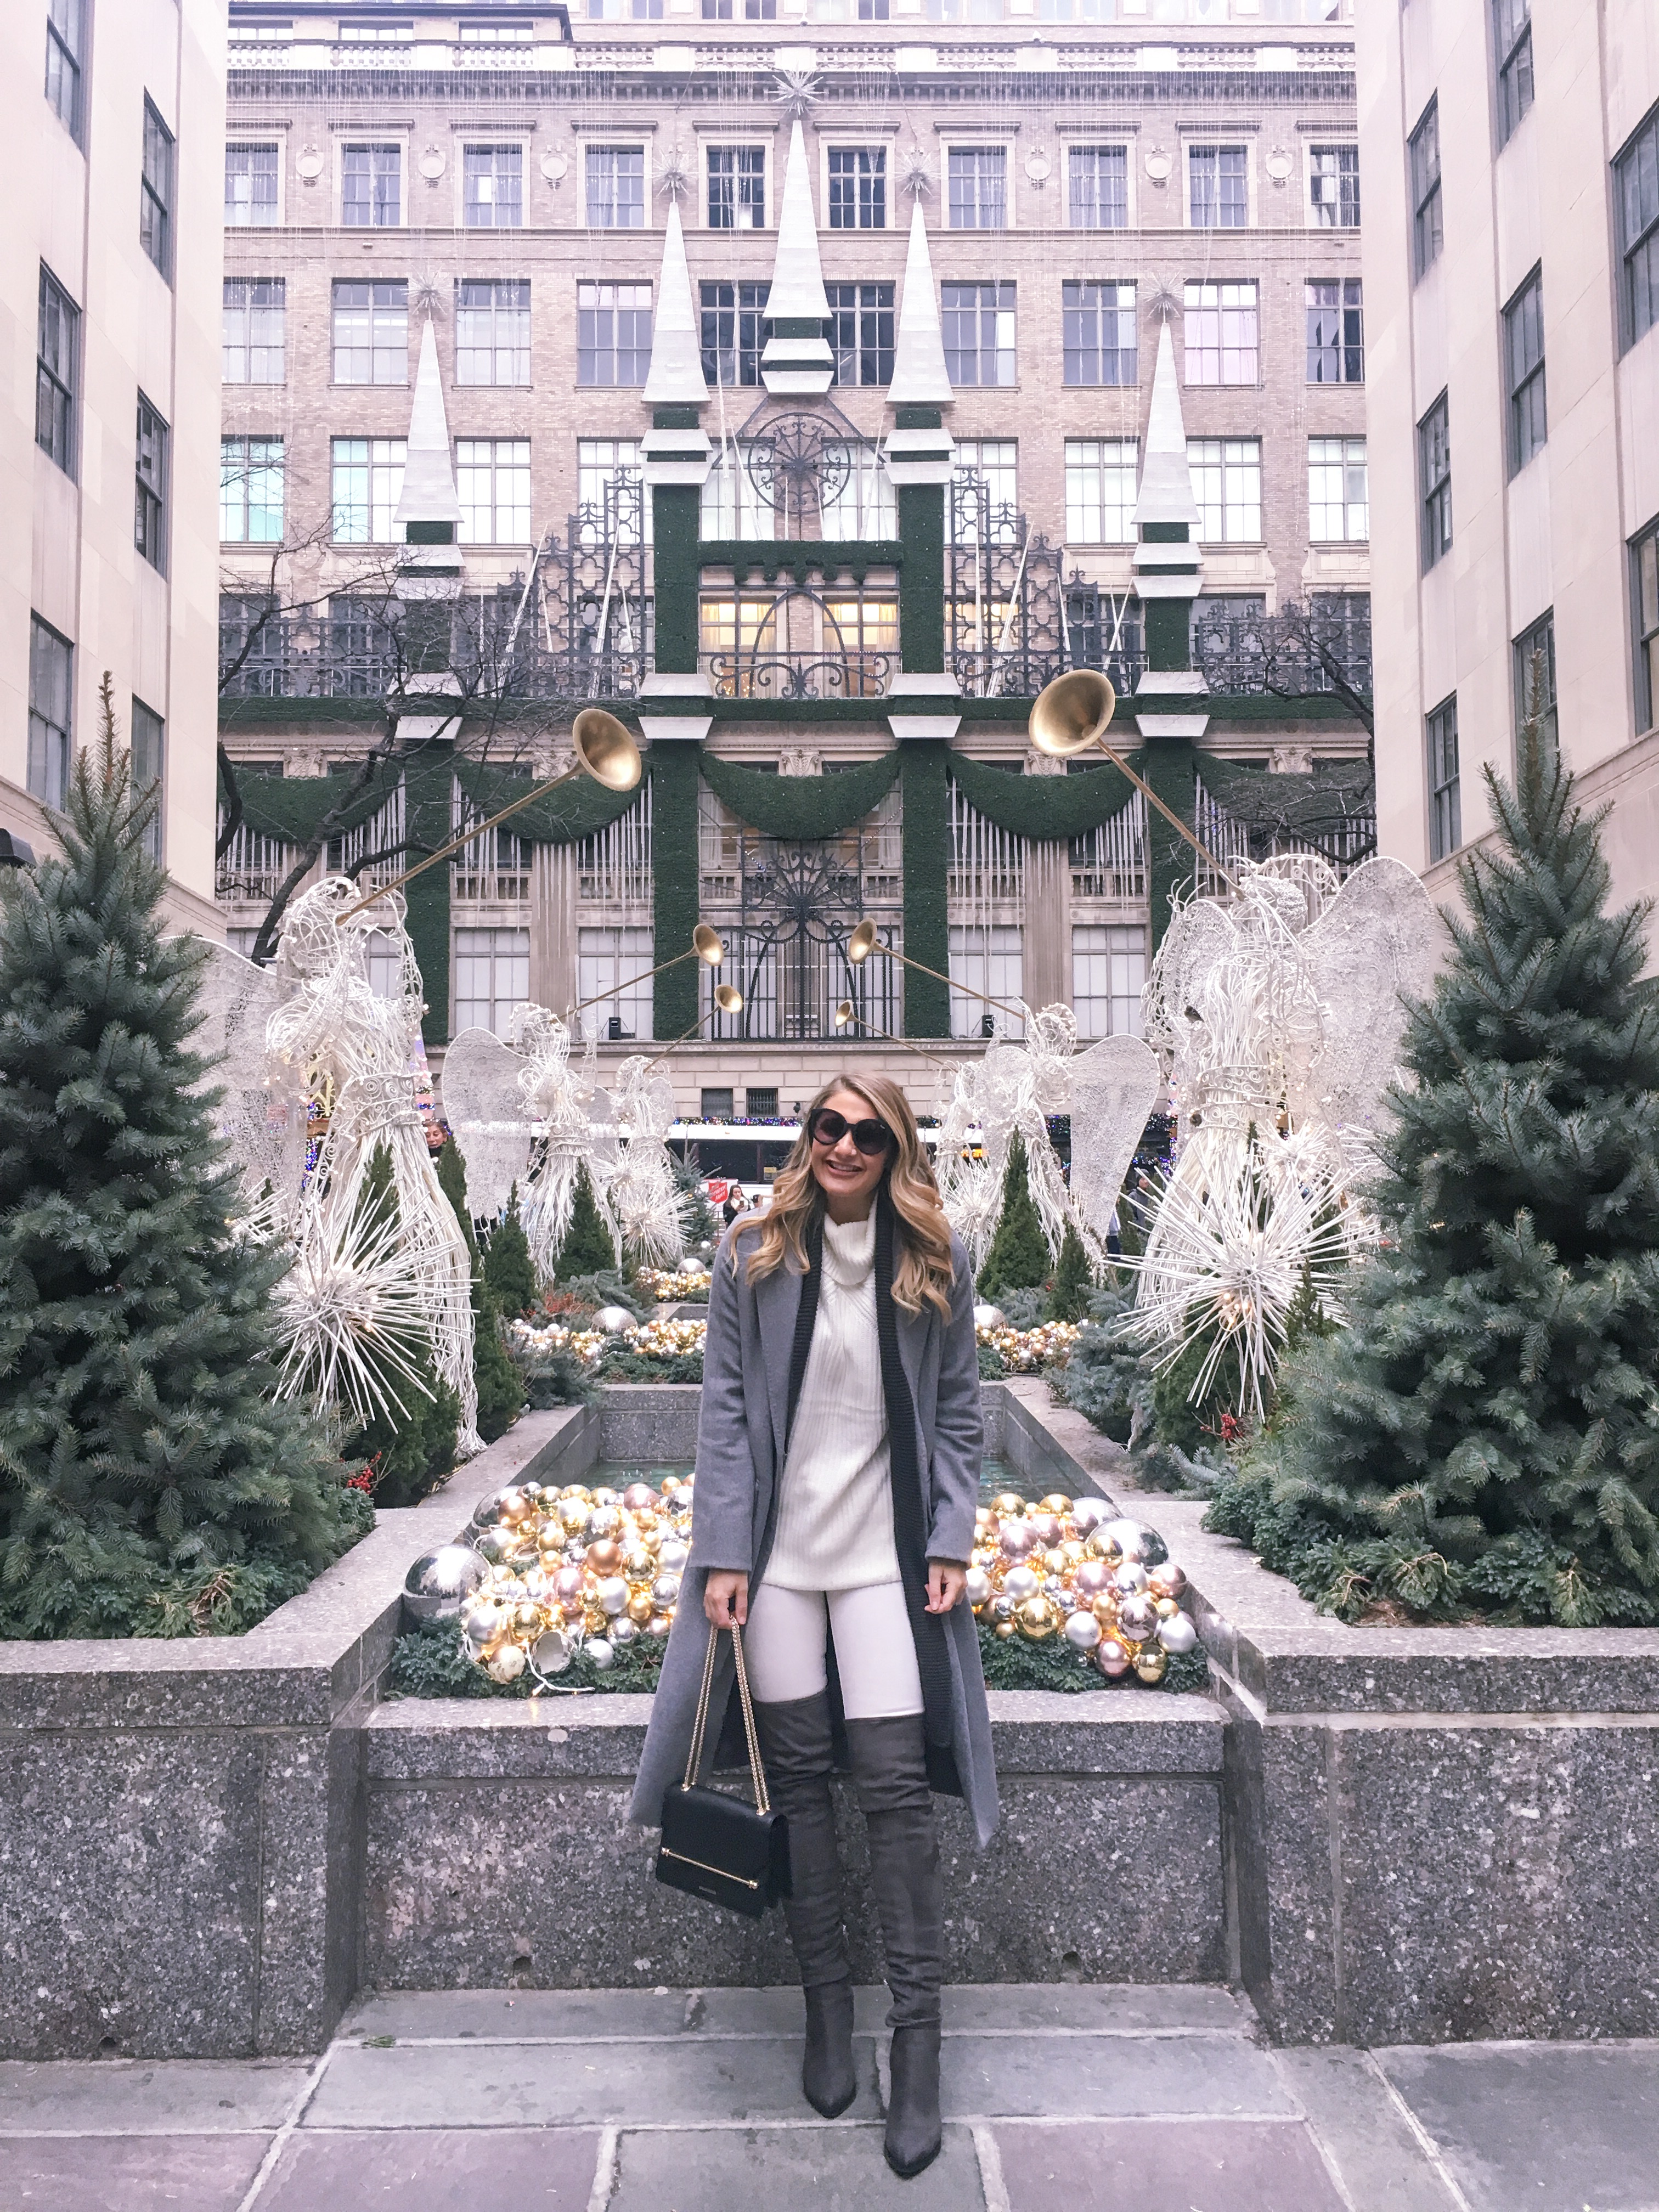 rockefeller center - A Weekend In New York by popular Chicago travel blogger Visions of Vogue